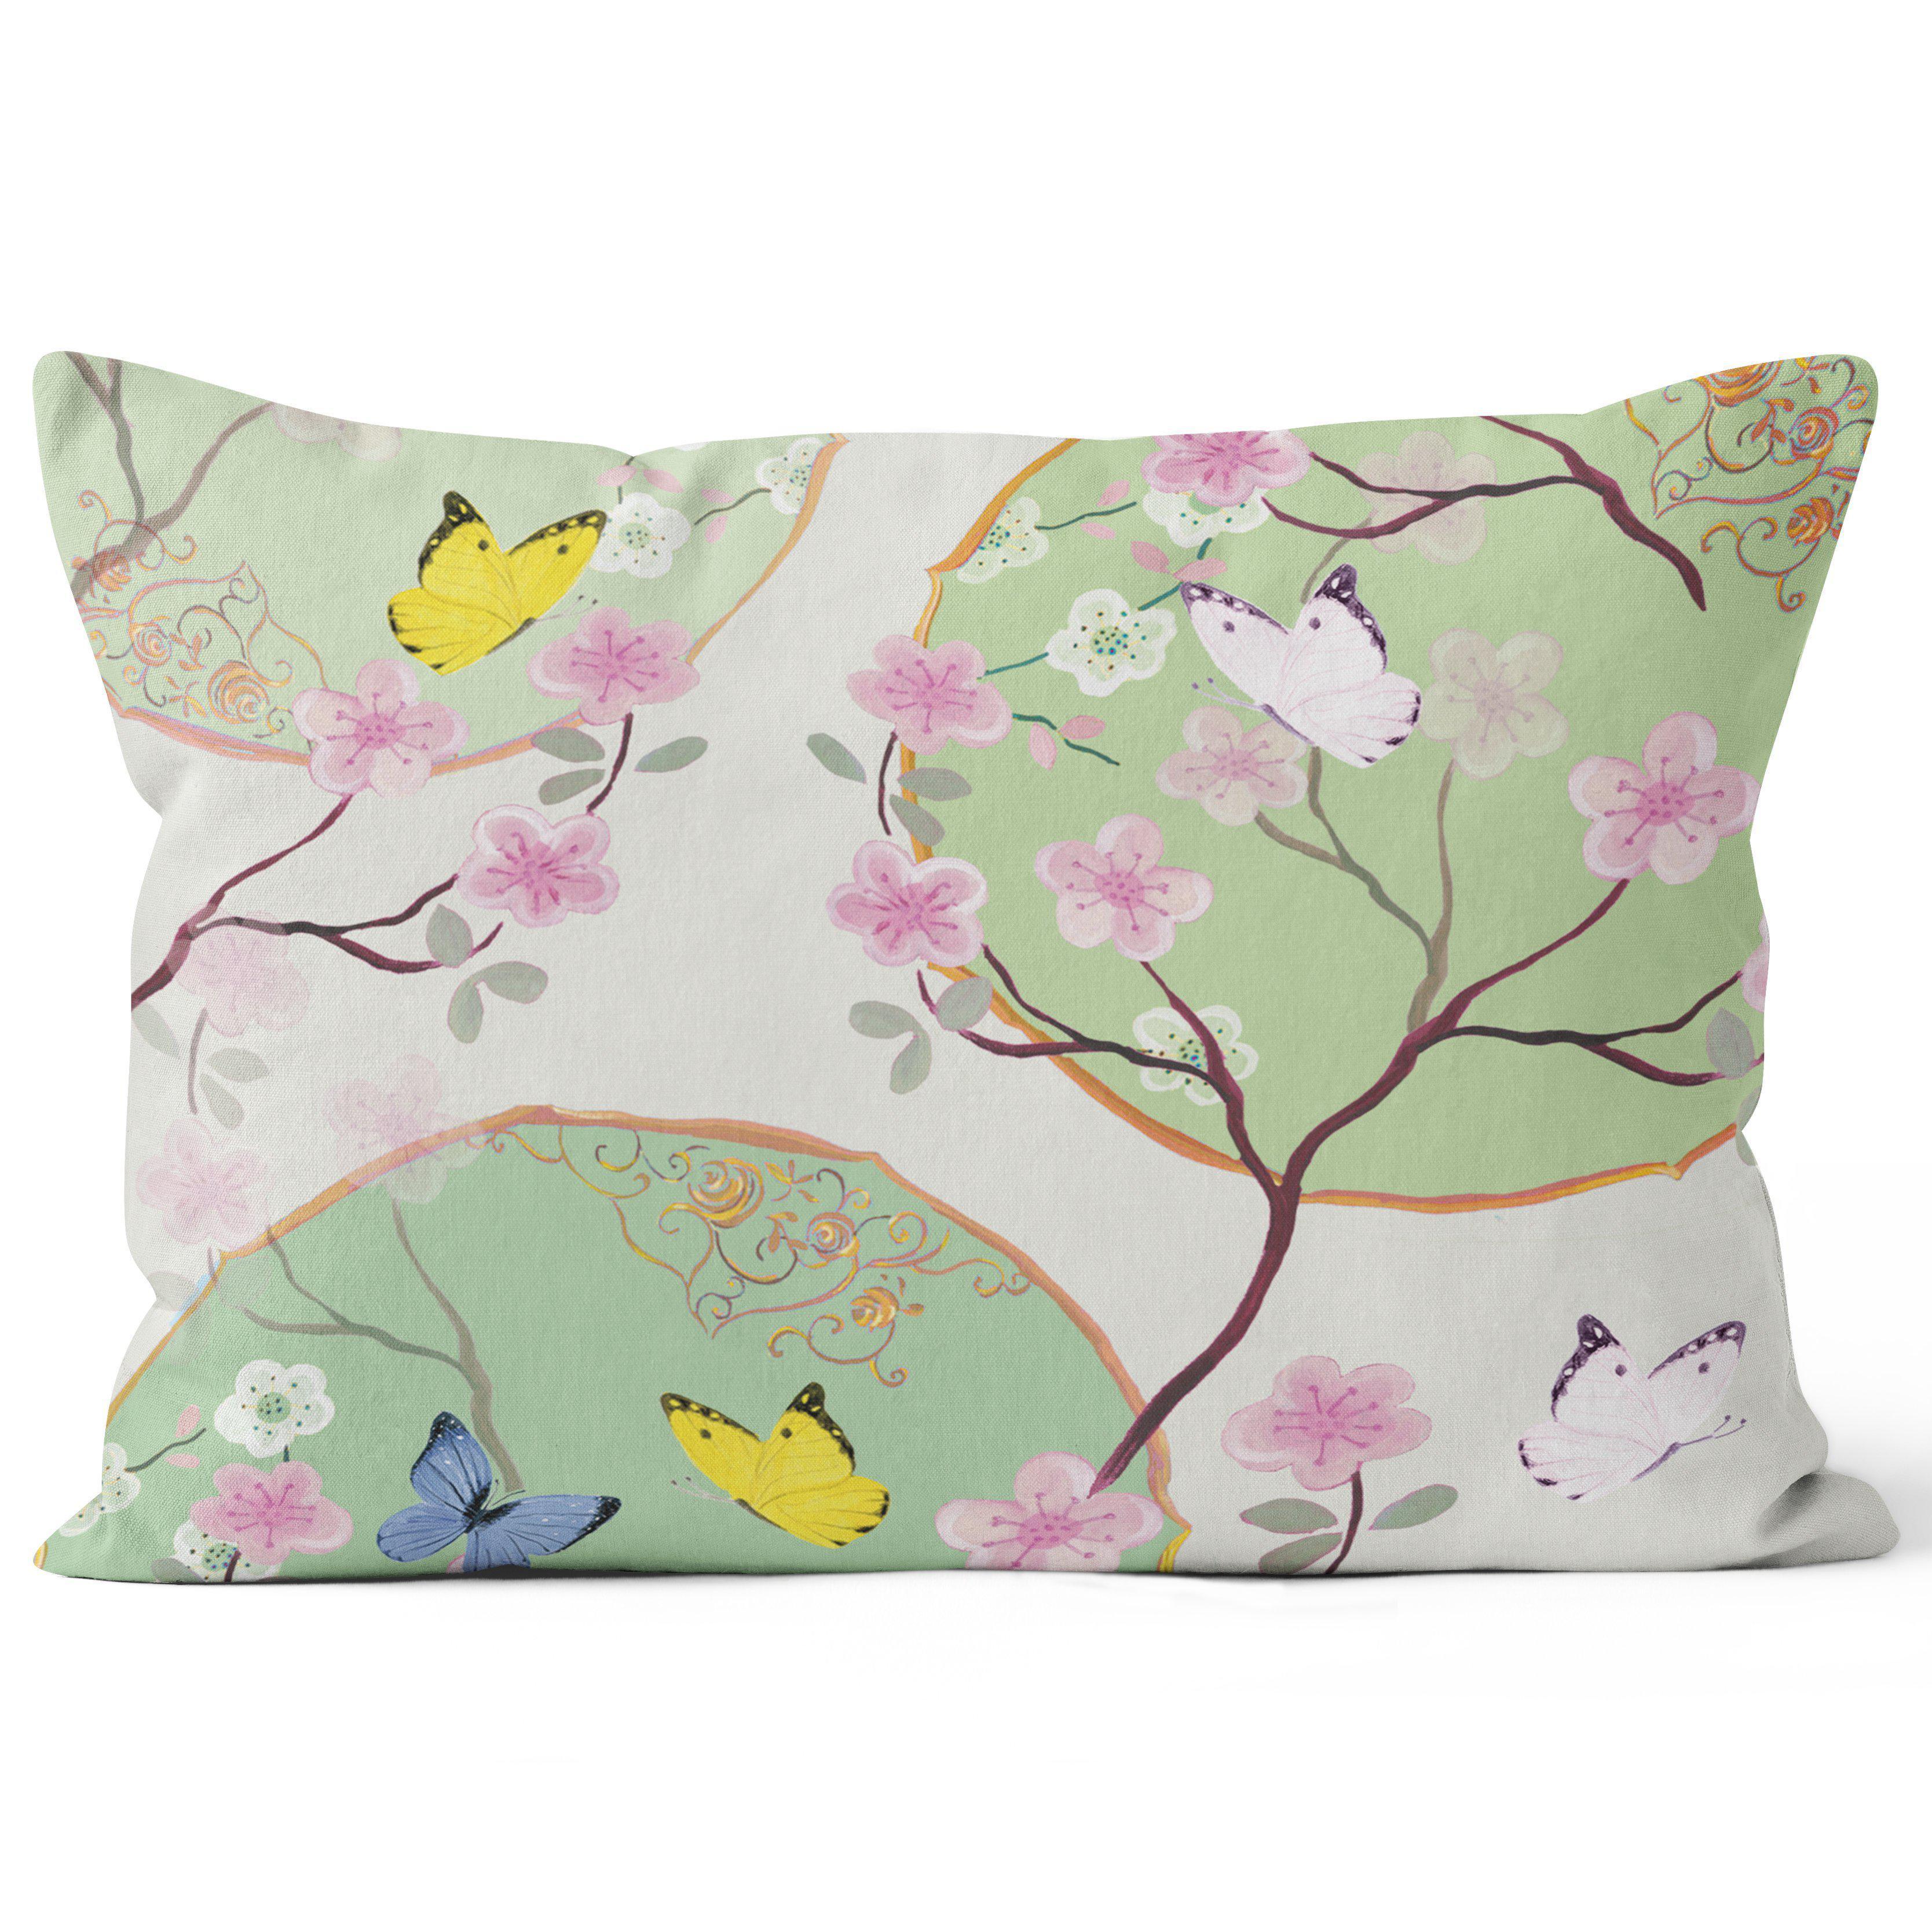 Butterfly Dreams ( White) - Funky Art Cushion - Garden Of Eden - House Of Turnowsky Pillows - Handmade Cushions UK - WeLoveCushions